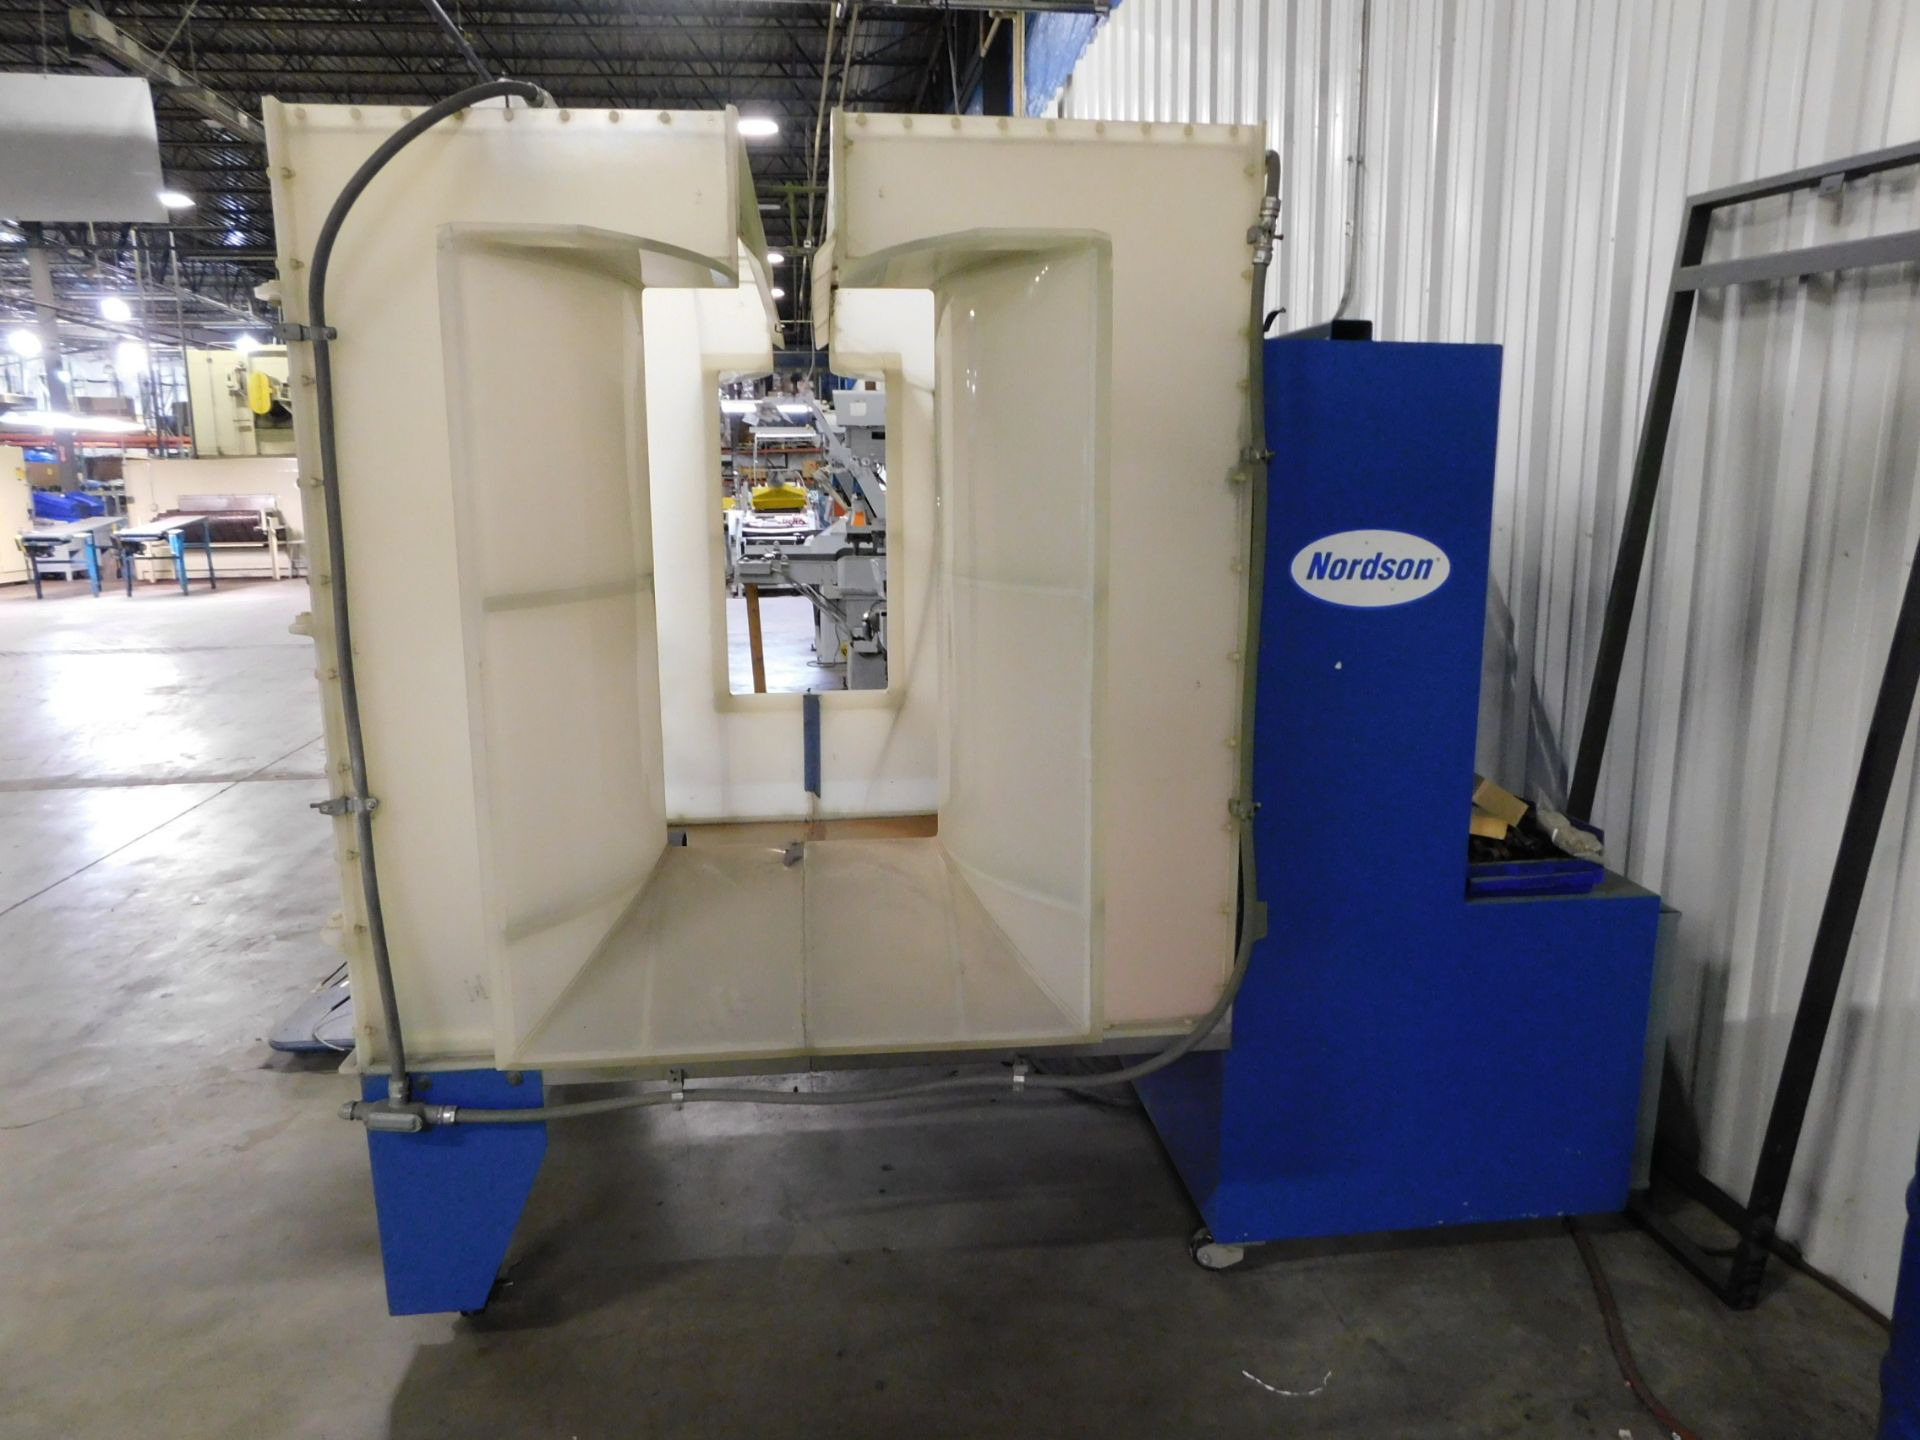 Nordson Econo Coat Series II, Model 180780-A02 Manual Powder Coat Booth, s/n 04180, with Nordson - Image 2 of 8